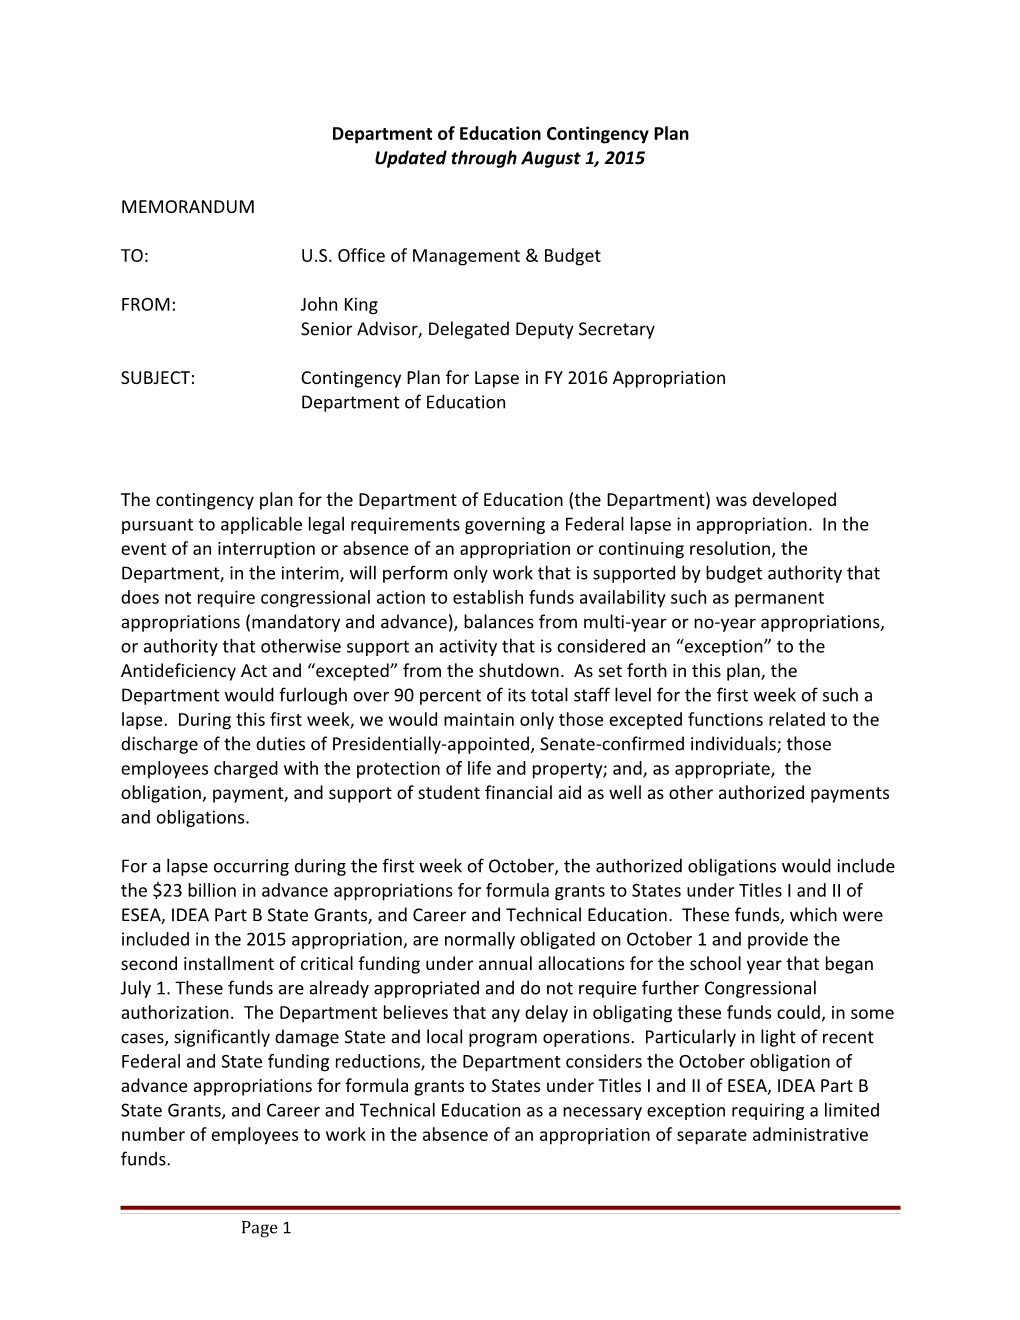 Contingency Plan for Lapse in FY 2016 Appropriation Department of Education September 25